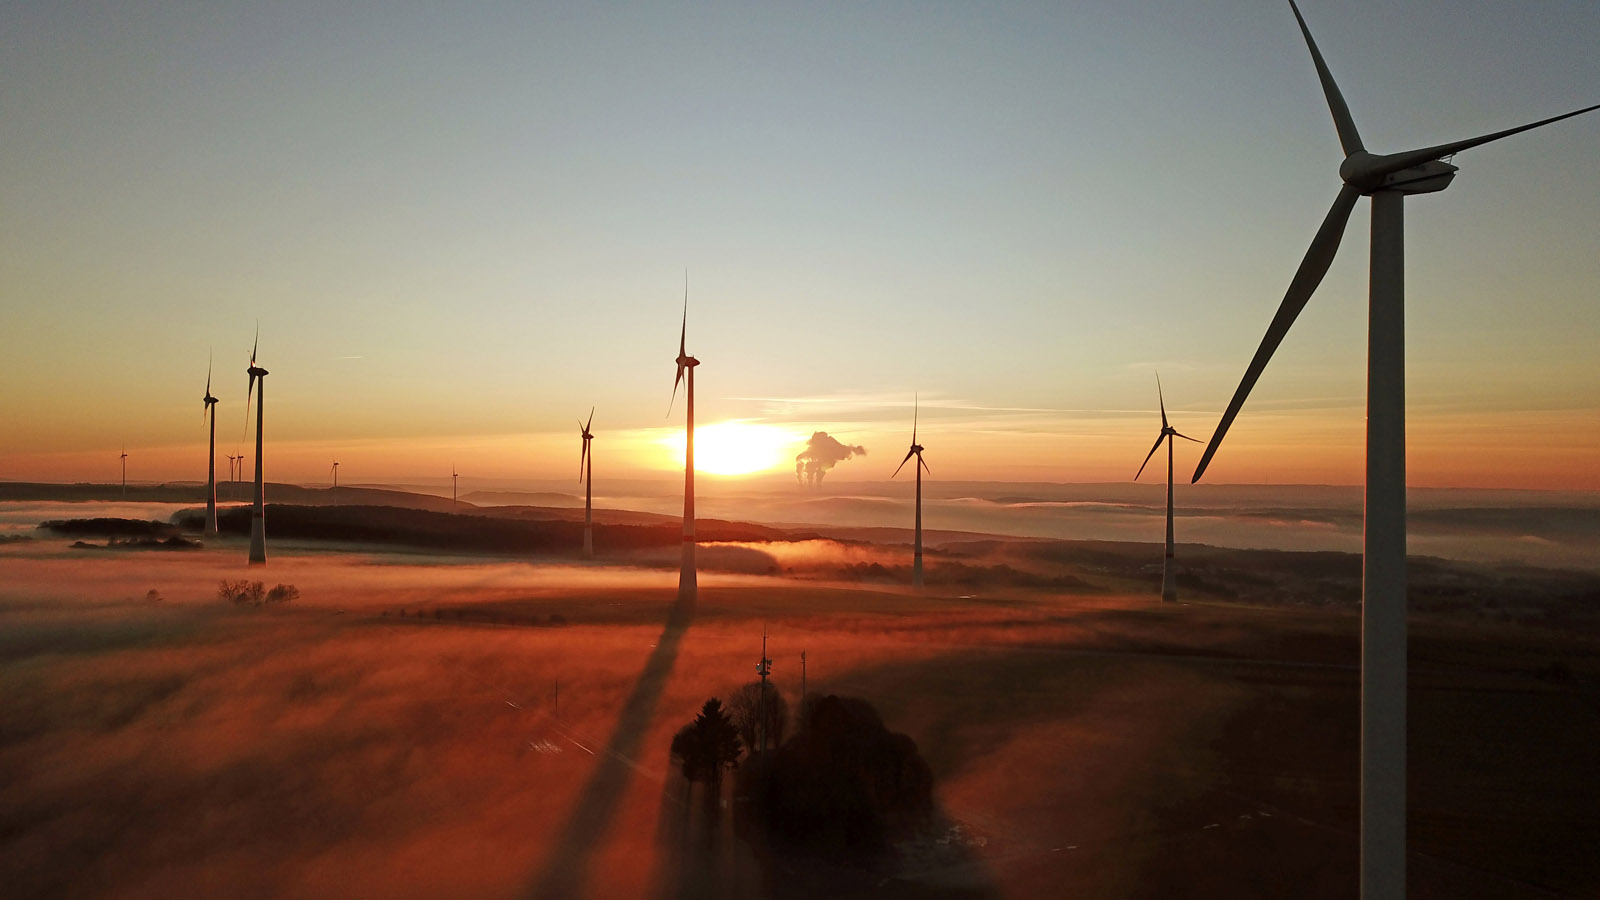 Around 20 percent of electricity in Germany was generated by wind turbines in 2018.